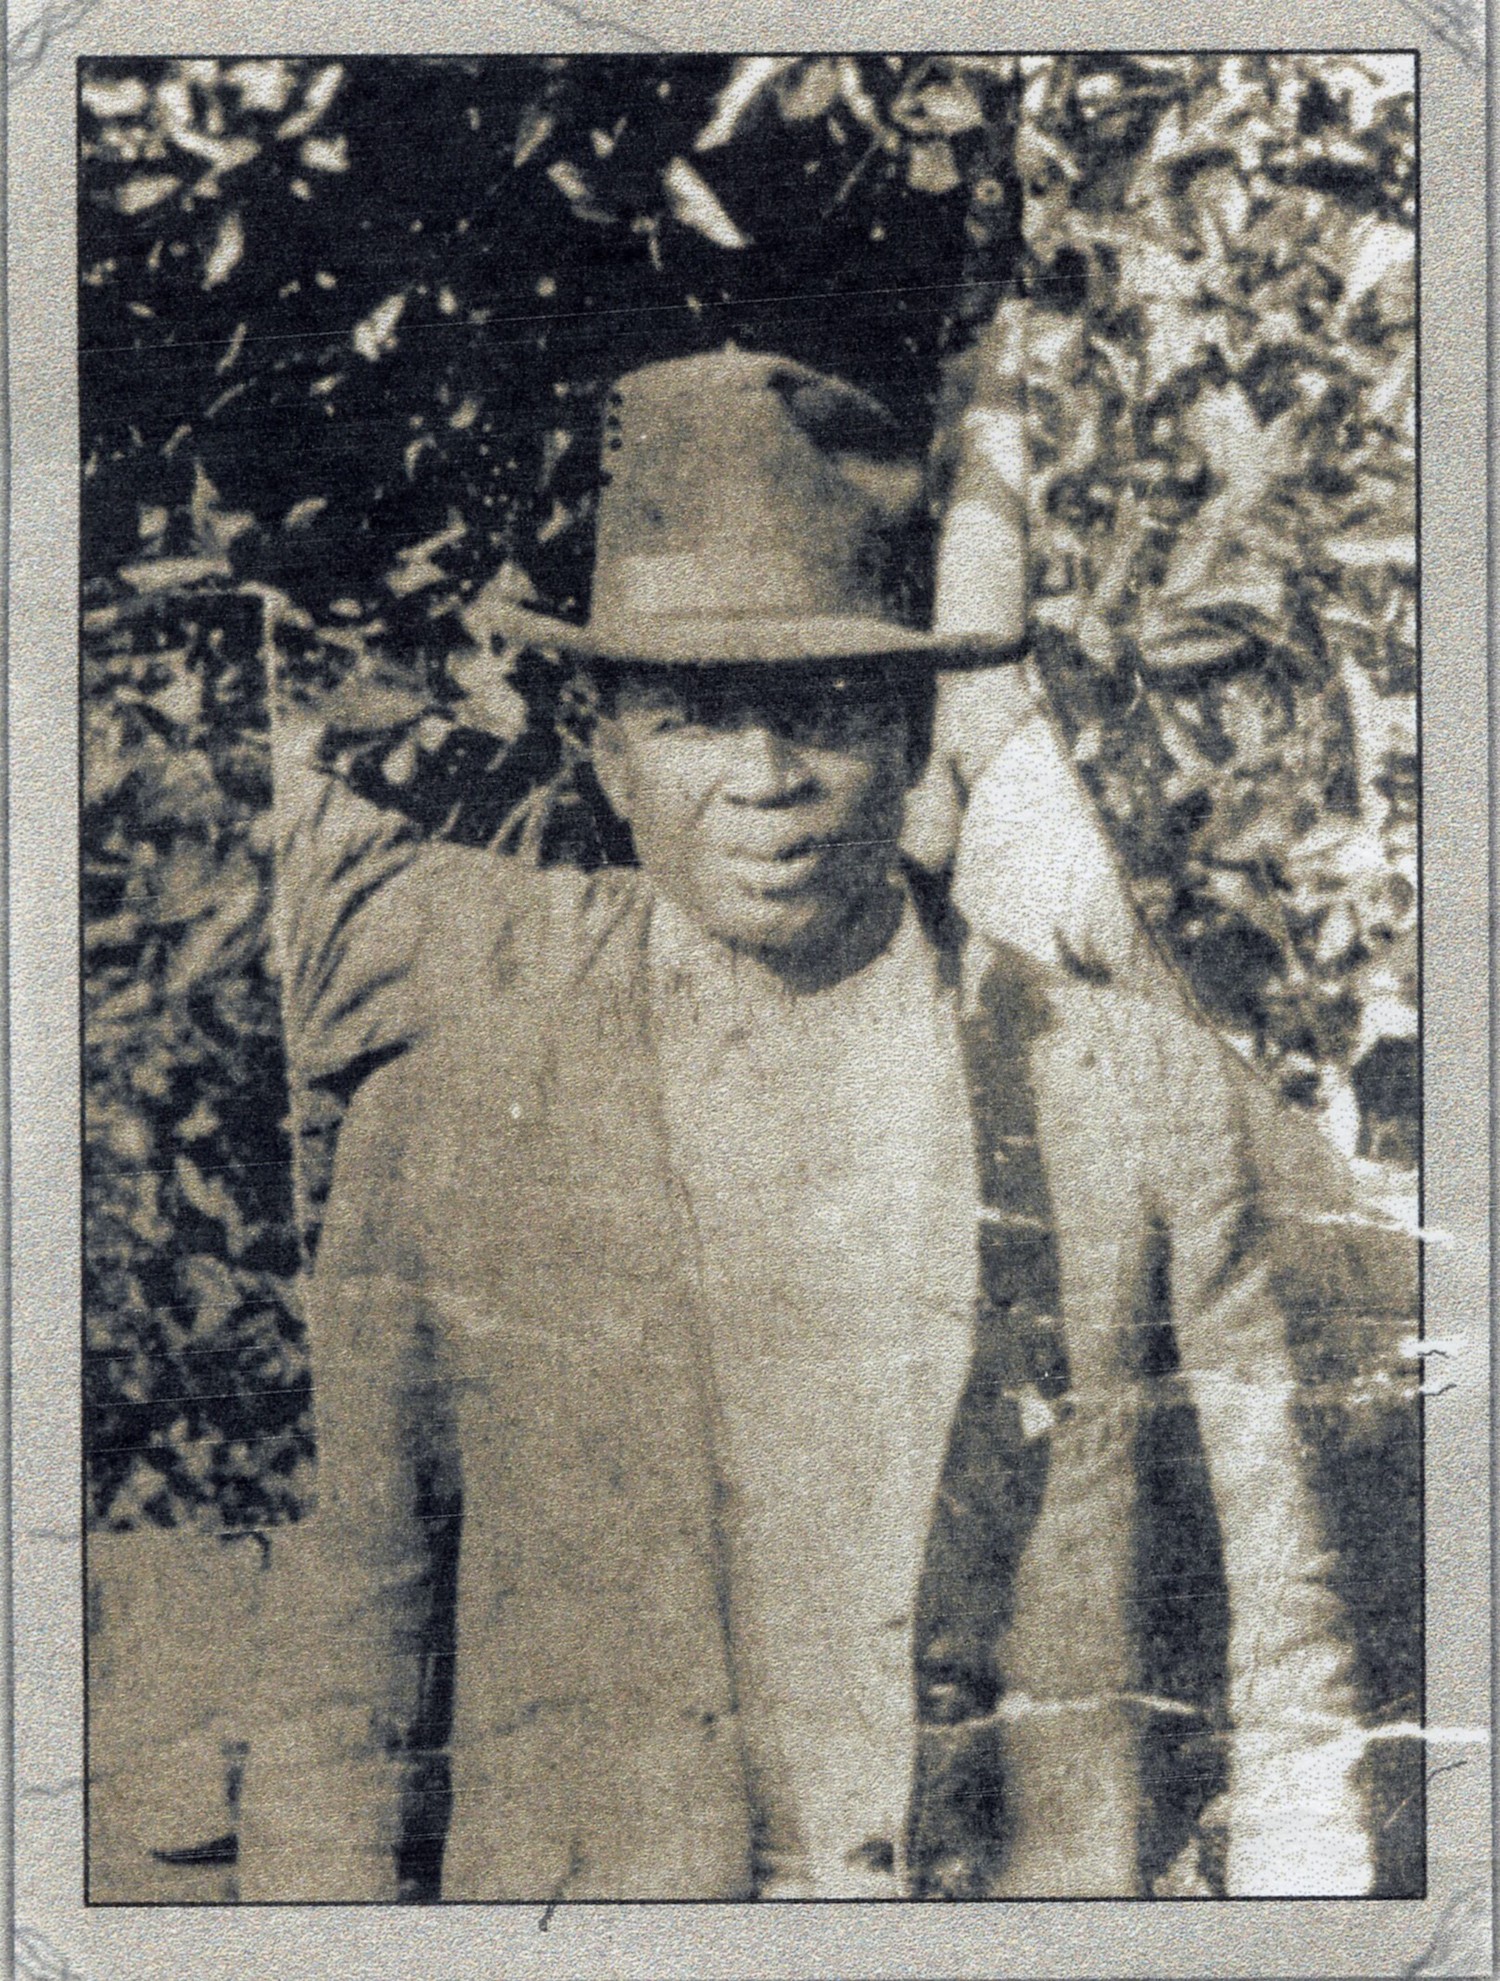 On Election Day in 1920, Julius 'July' Perry was beaten and lynched by white men incensed that he attempted to vote. - Photos and documents courtesy Orange County Regional History Center